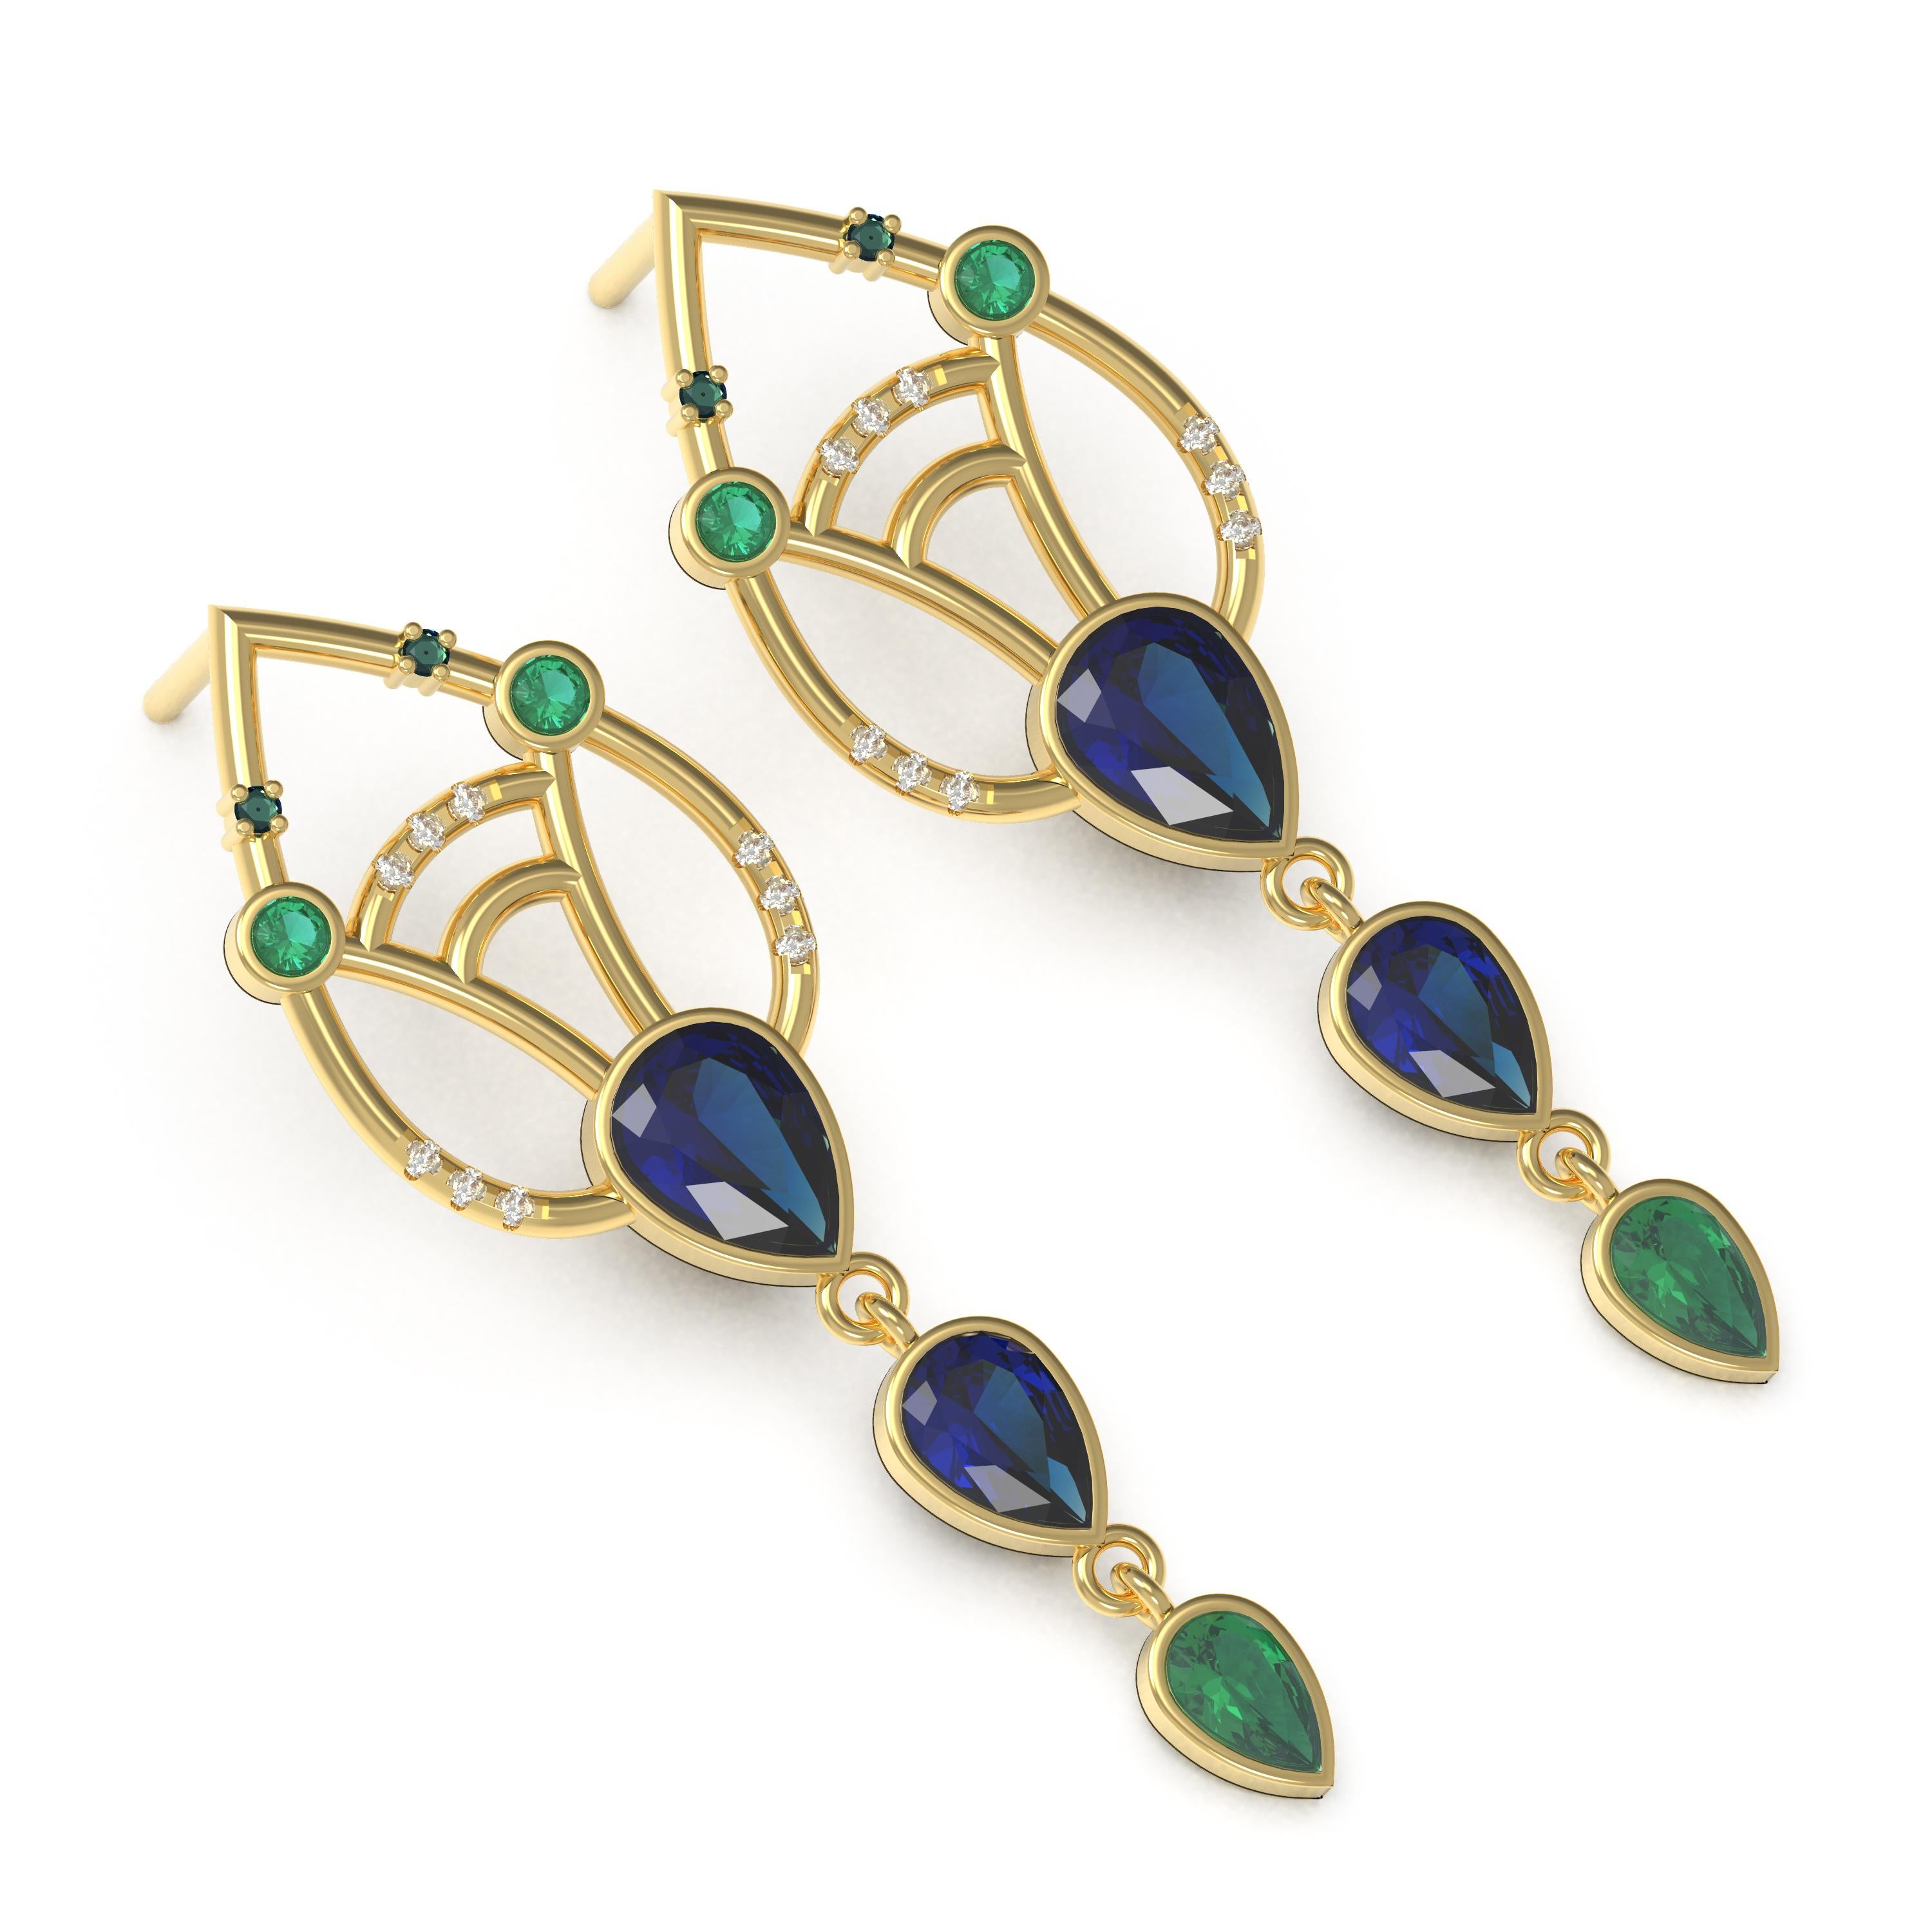 Designer: Alexia Gryllaki
Dimensions: L40x13mm
Weight: approximately 5.8g (pair)
Barcode: ING020E

The Interlocking Geometry earrings in 18 karat yellow gold with sapphires approx. 2.62cts, emeralds approx. 0.60cts and round brilliant-cut diamonds